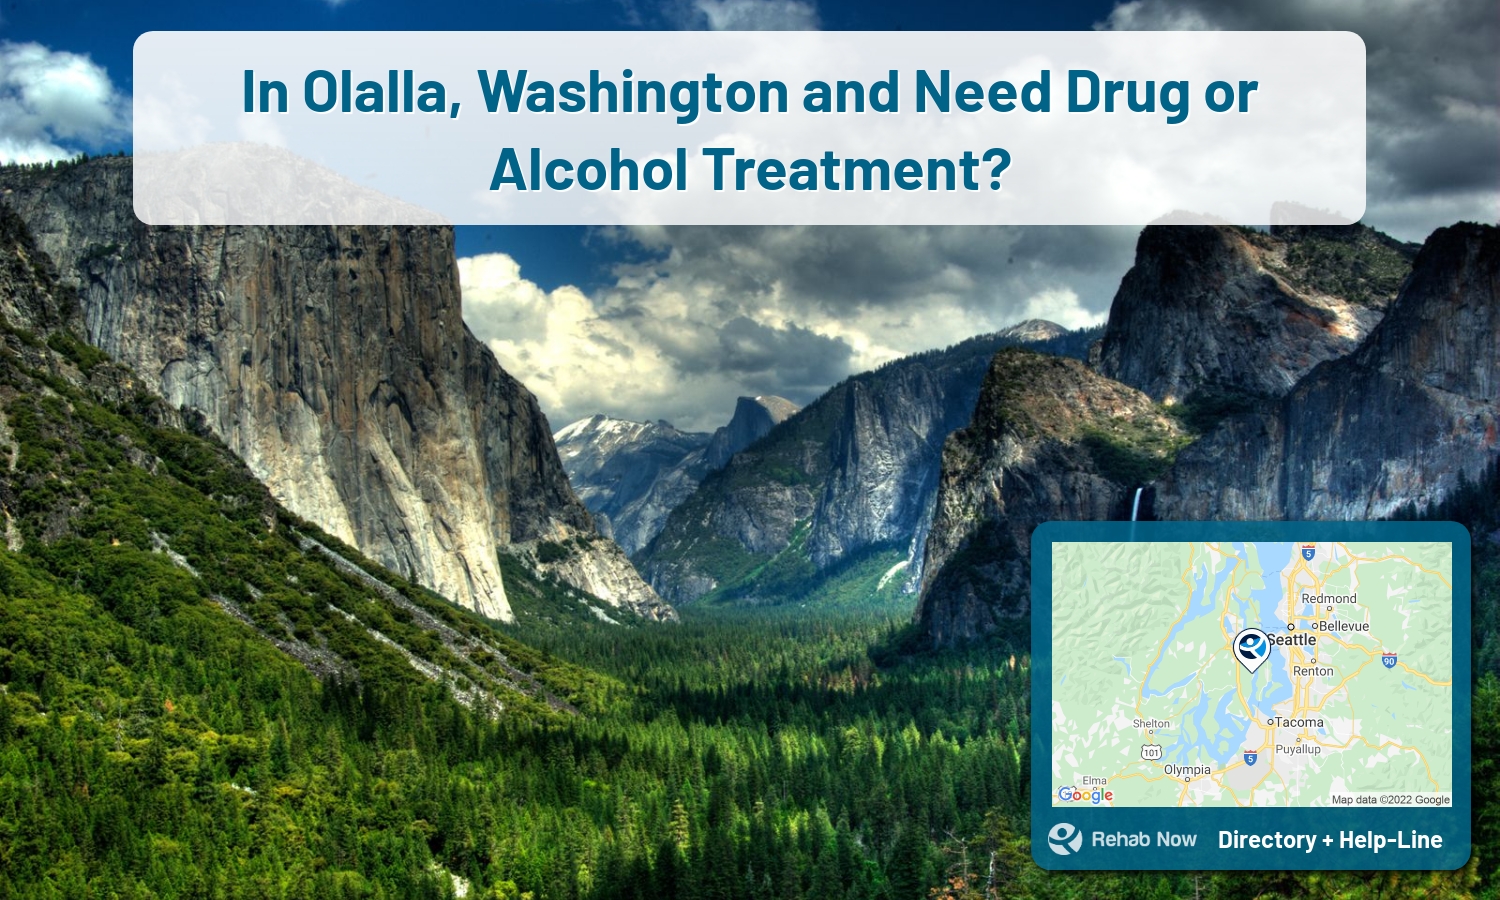 List of alcohol and drug treatment centers near you in Olalla, Washington. Research certifications, programs, methods, pricing, and more.